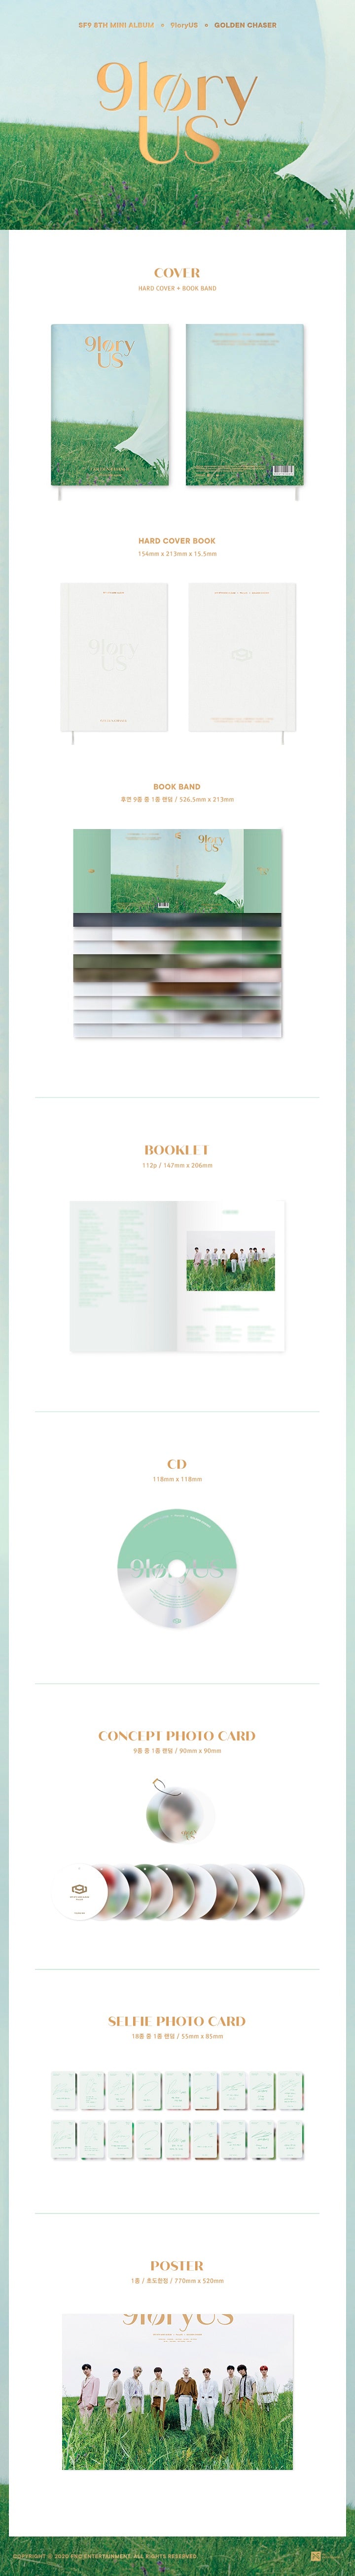 1 CD
1 Booklet (112 pages)
1 Bookband
1 Concept Photo Card
1 Selfie